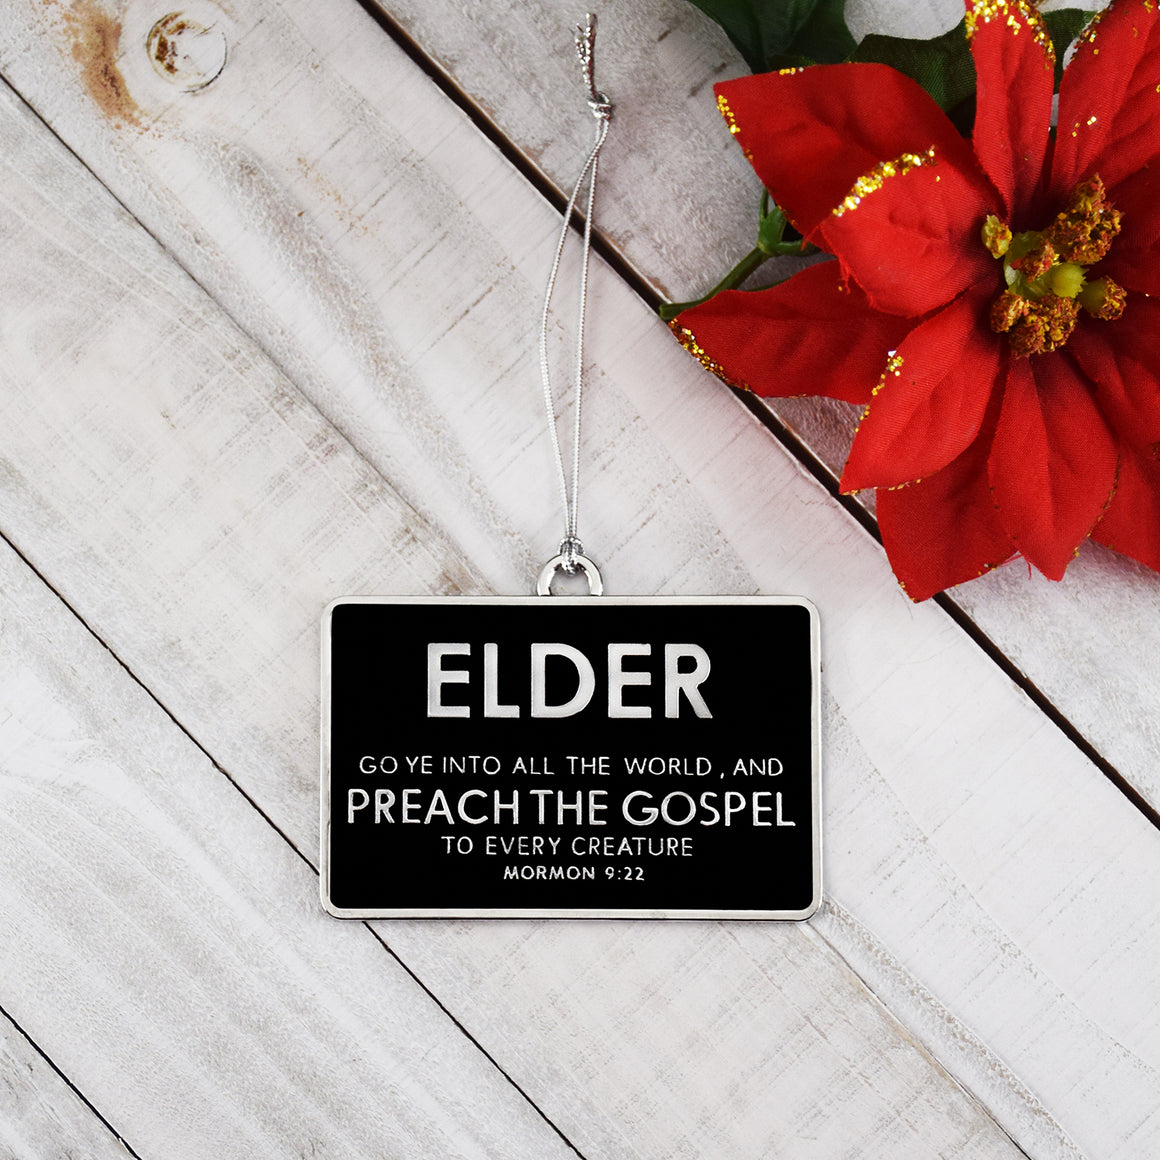 Elder Missionary Name Tag Silver Enamel Ornament by Ringmasters